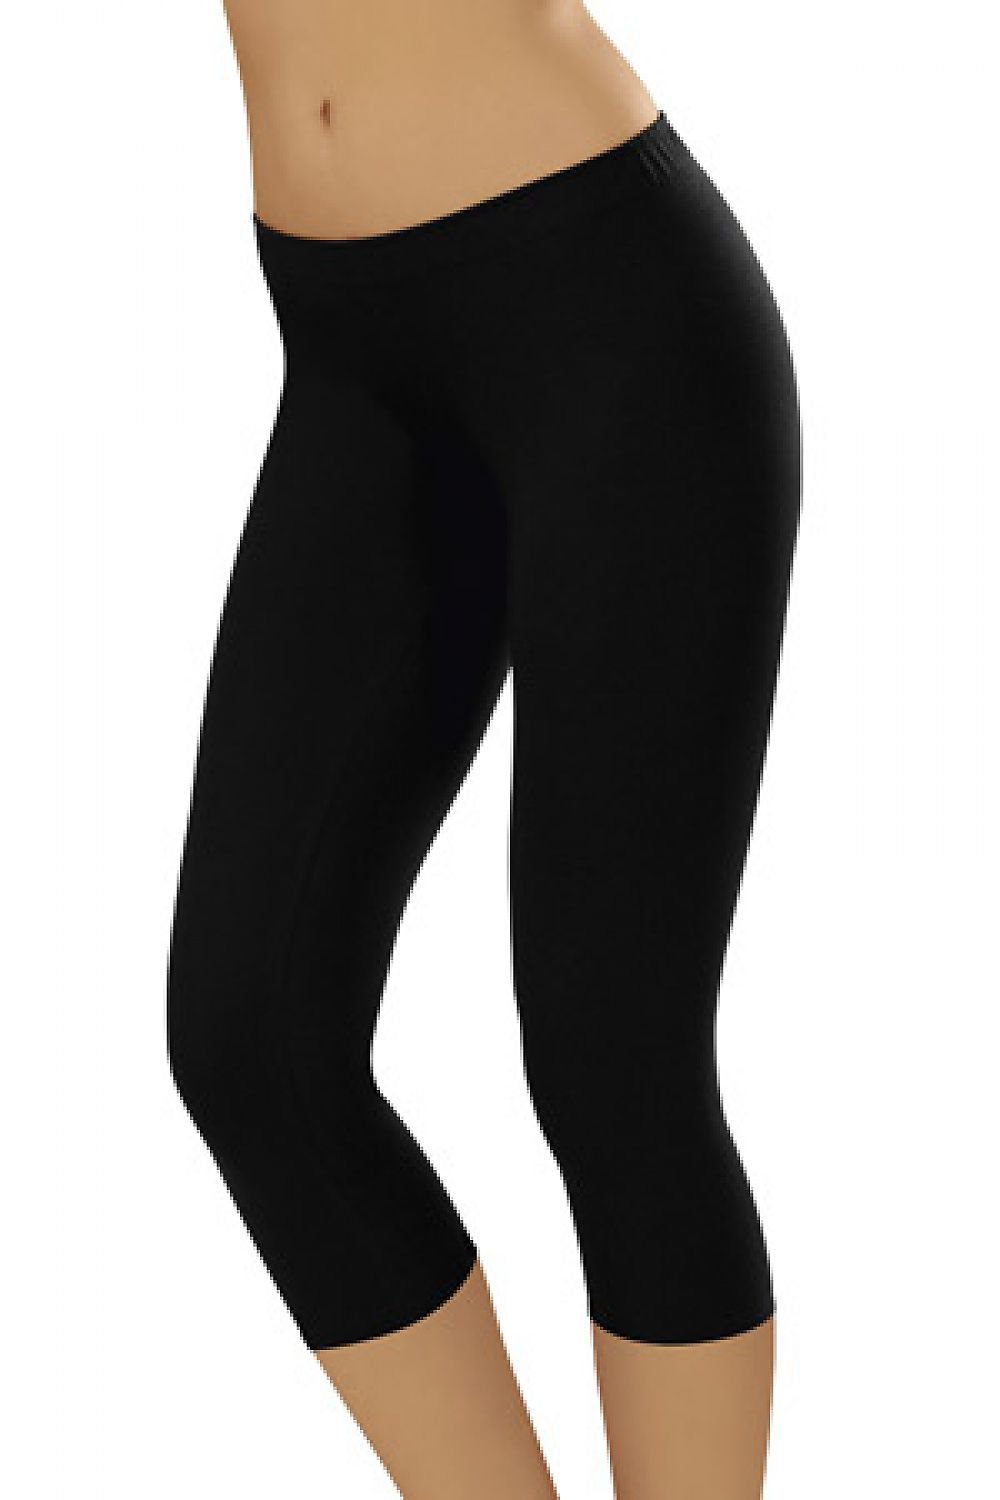 Cool Wholesale legging with heels In Any Size And Style 